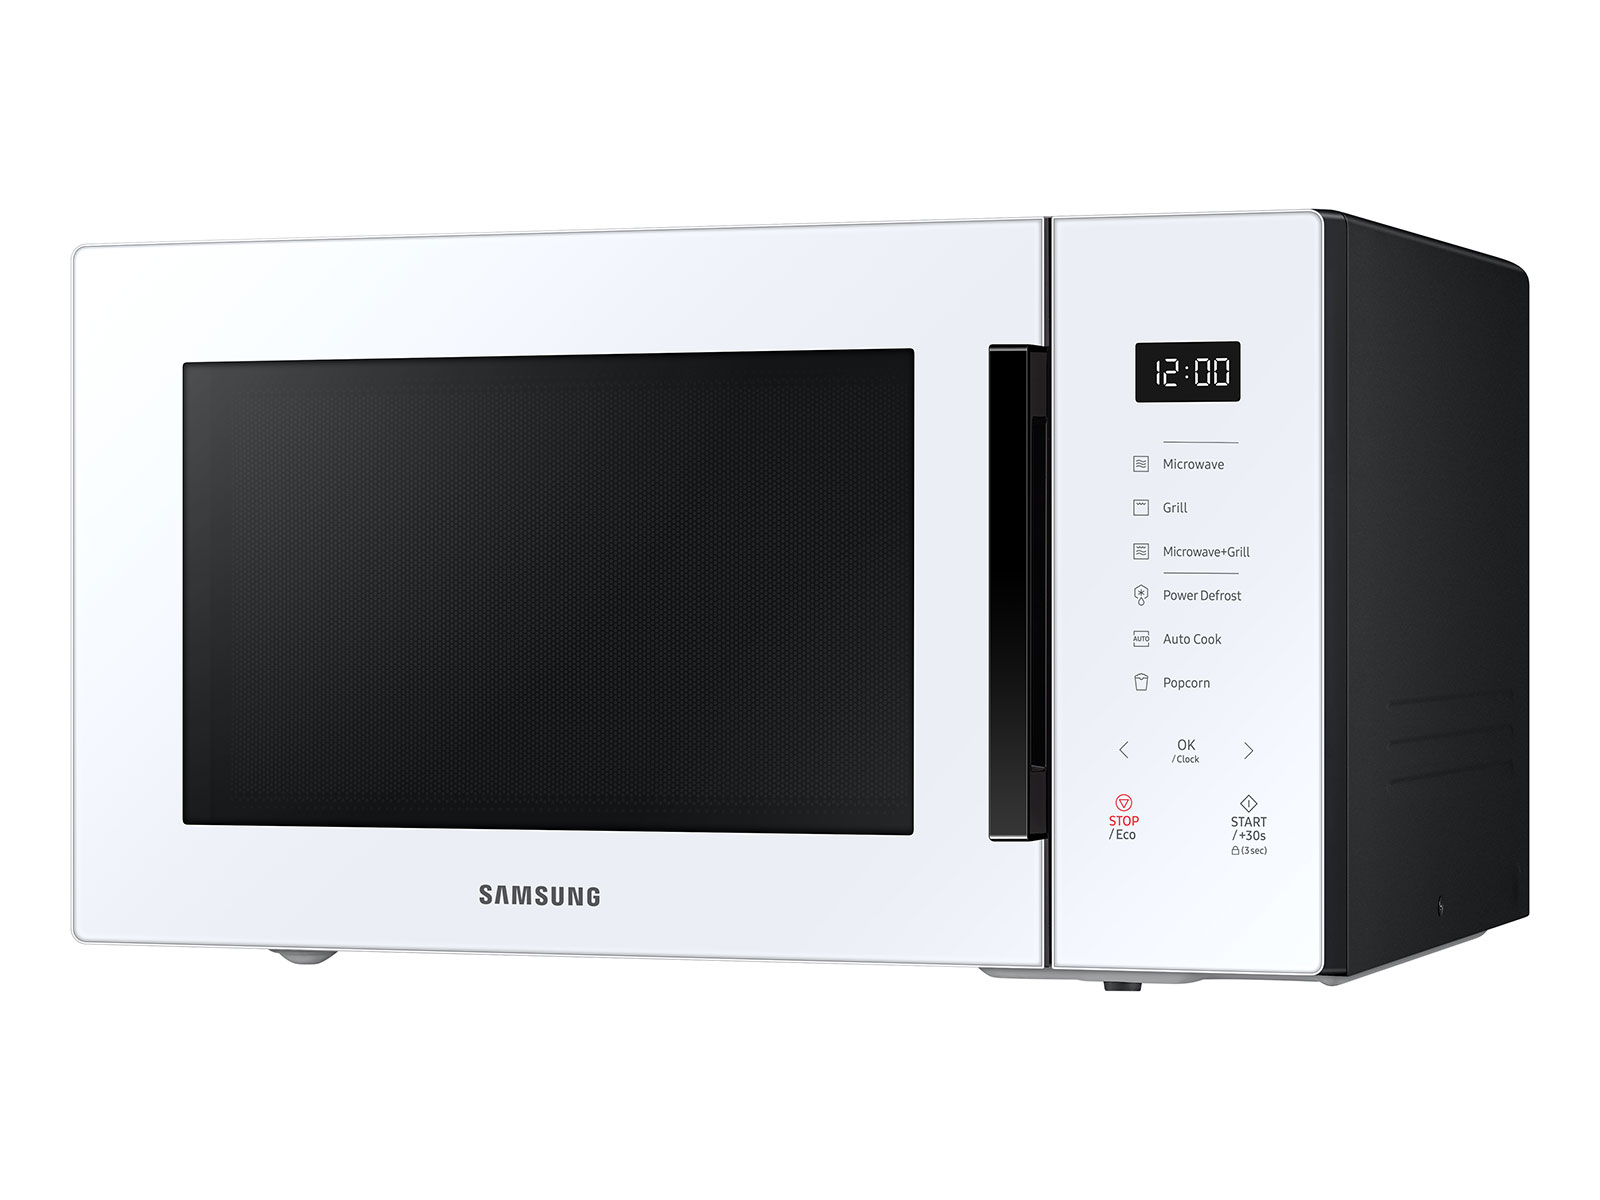 White Countertop Microwaves at